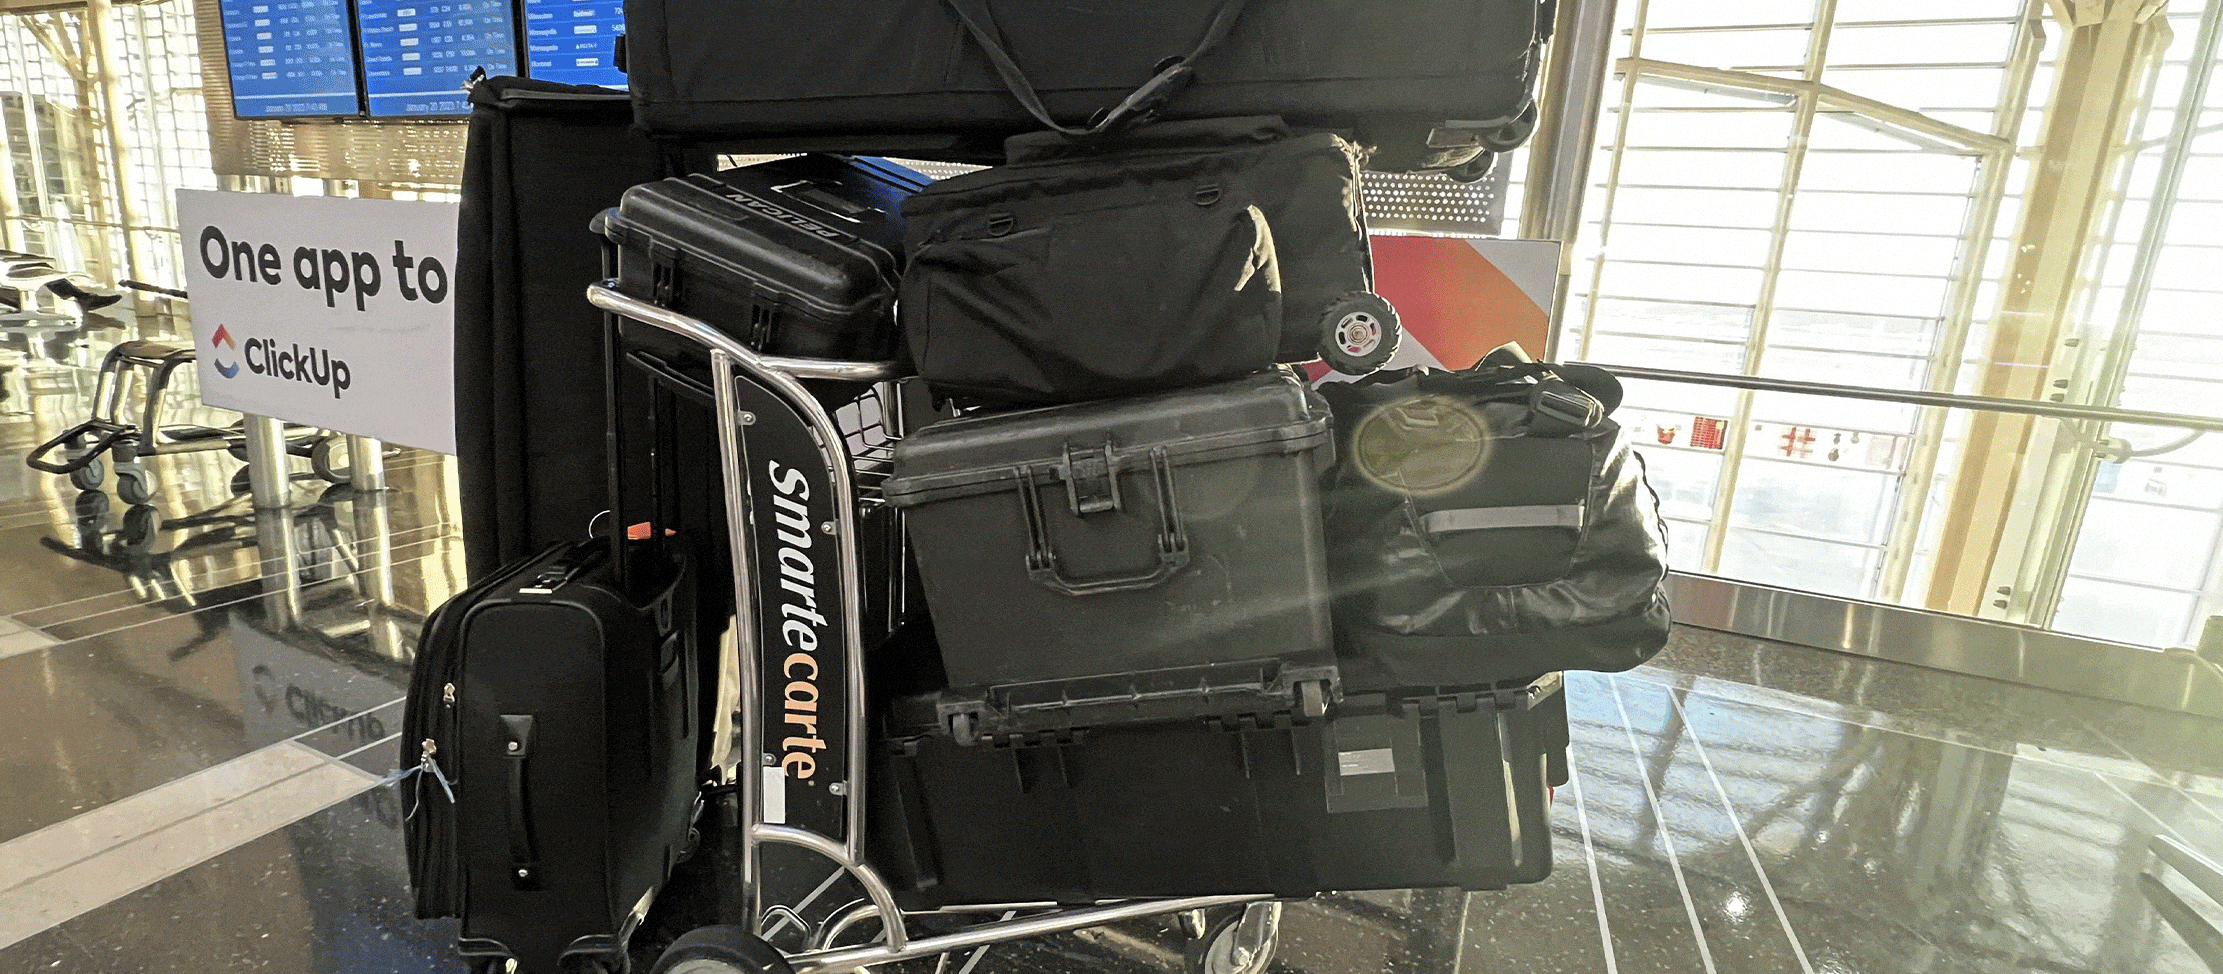 Video Crews Travel With A Lot Of Equipment